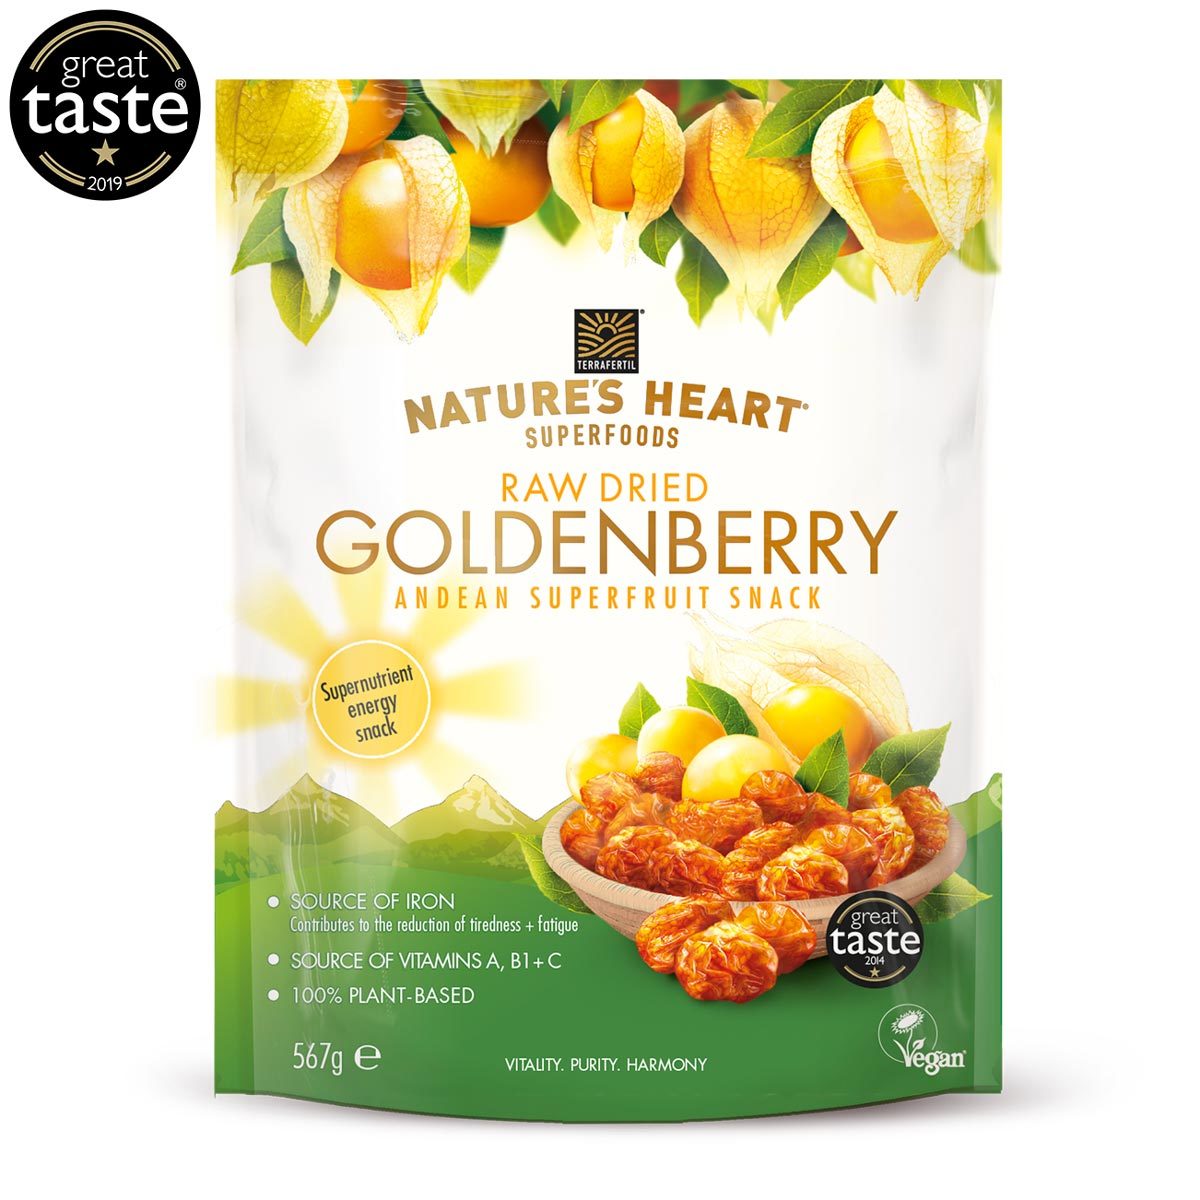 Nature's Heart Raw Dried Goldenberry, 567g Snacks Costco UK   